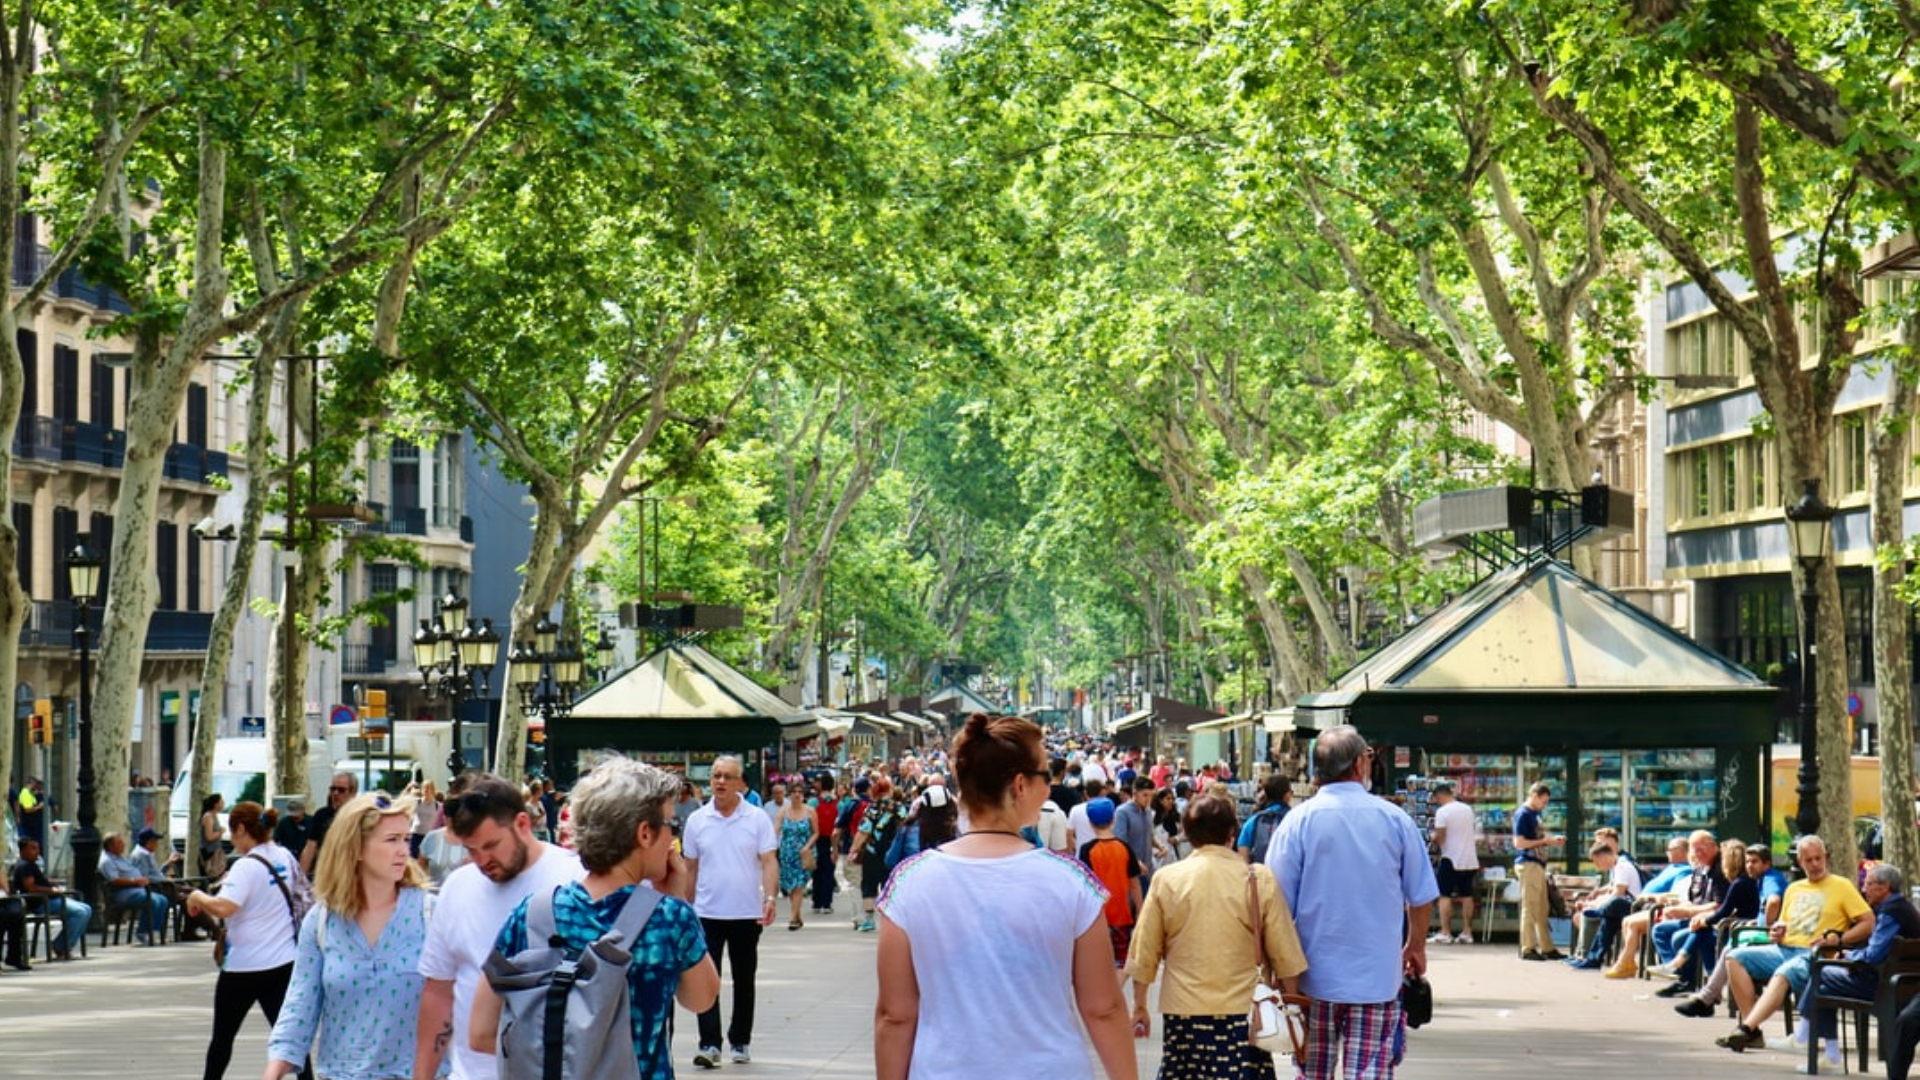 Las Ramblas in Barcelona: what to see in this picturesque street